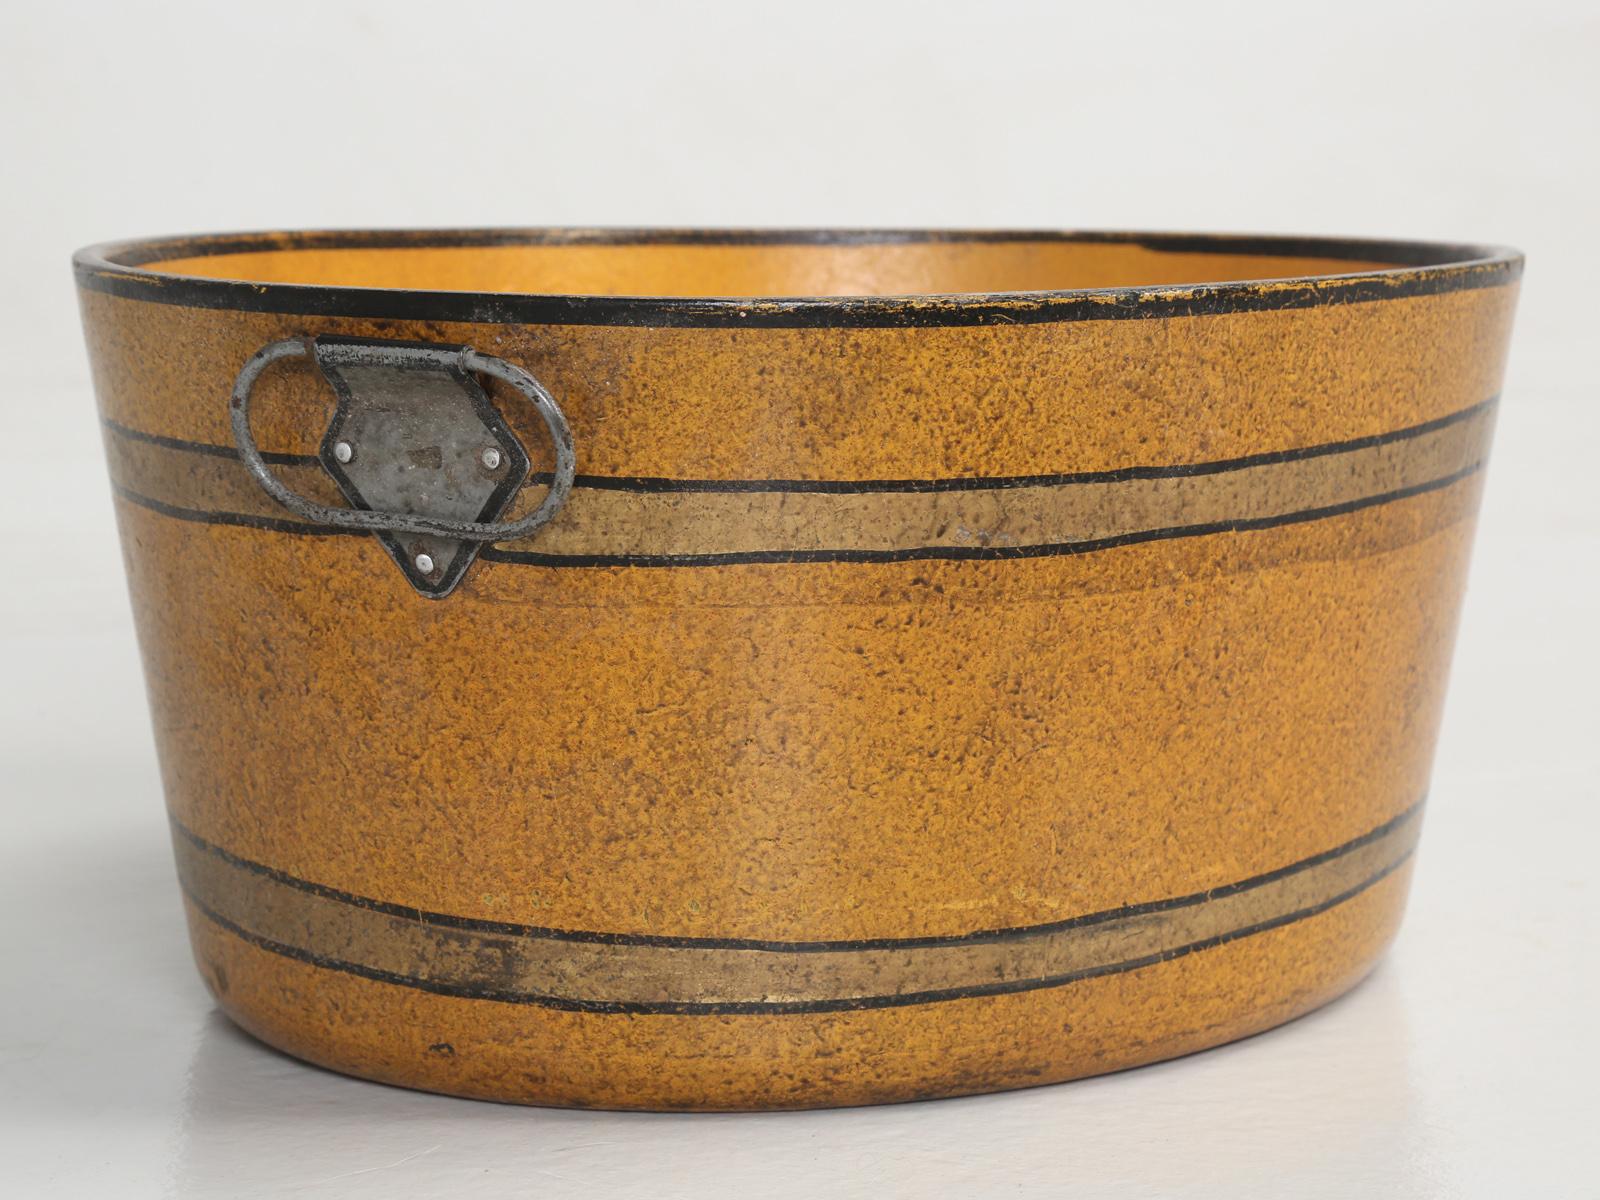 Wonderful French Paper-Mâché bucket, in a gorgeous shade of ochre. No visual damage, nor any repairs. Could possible make a nice Wine Bucket?